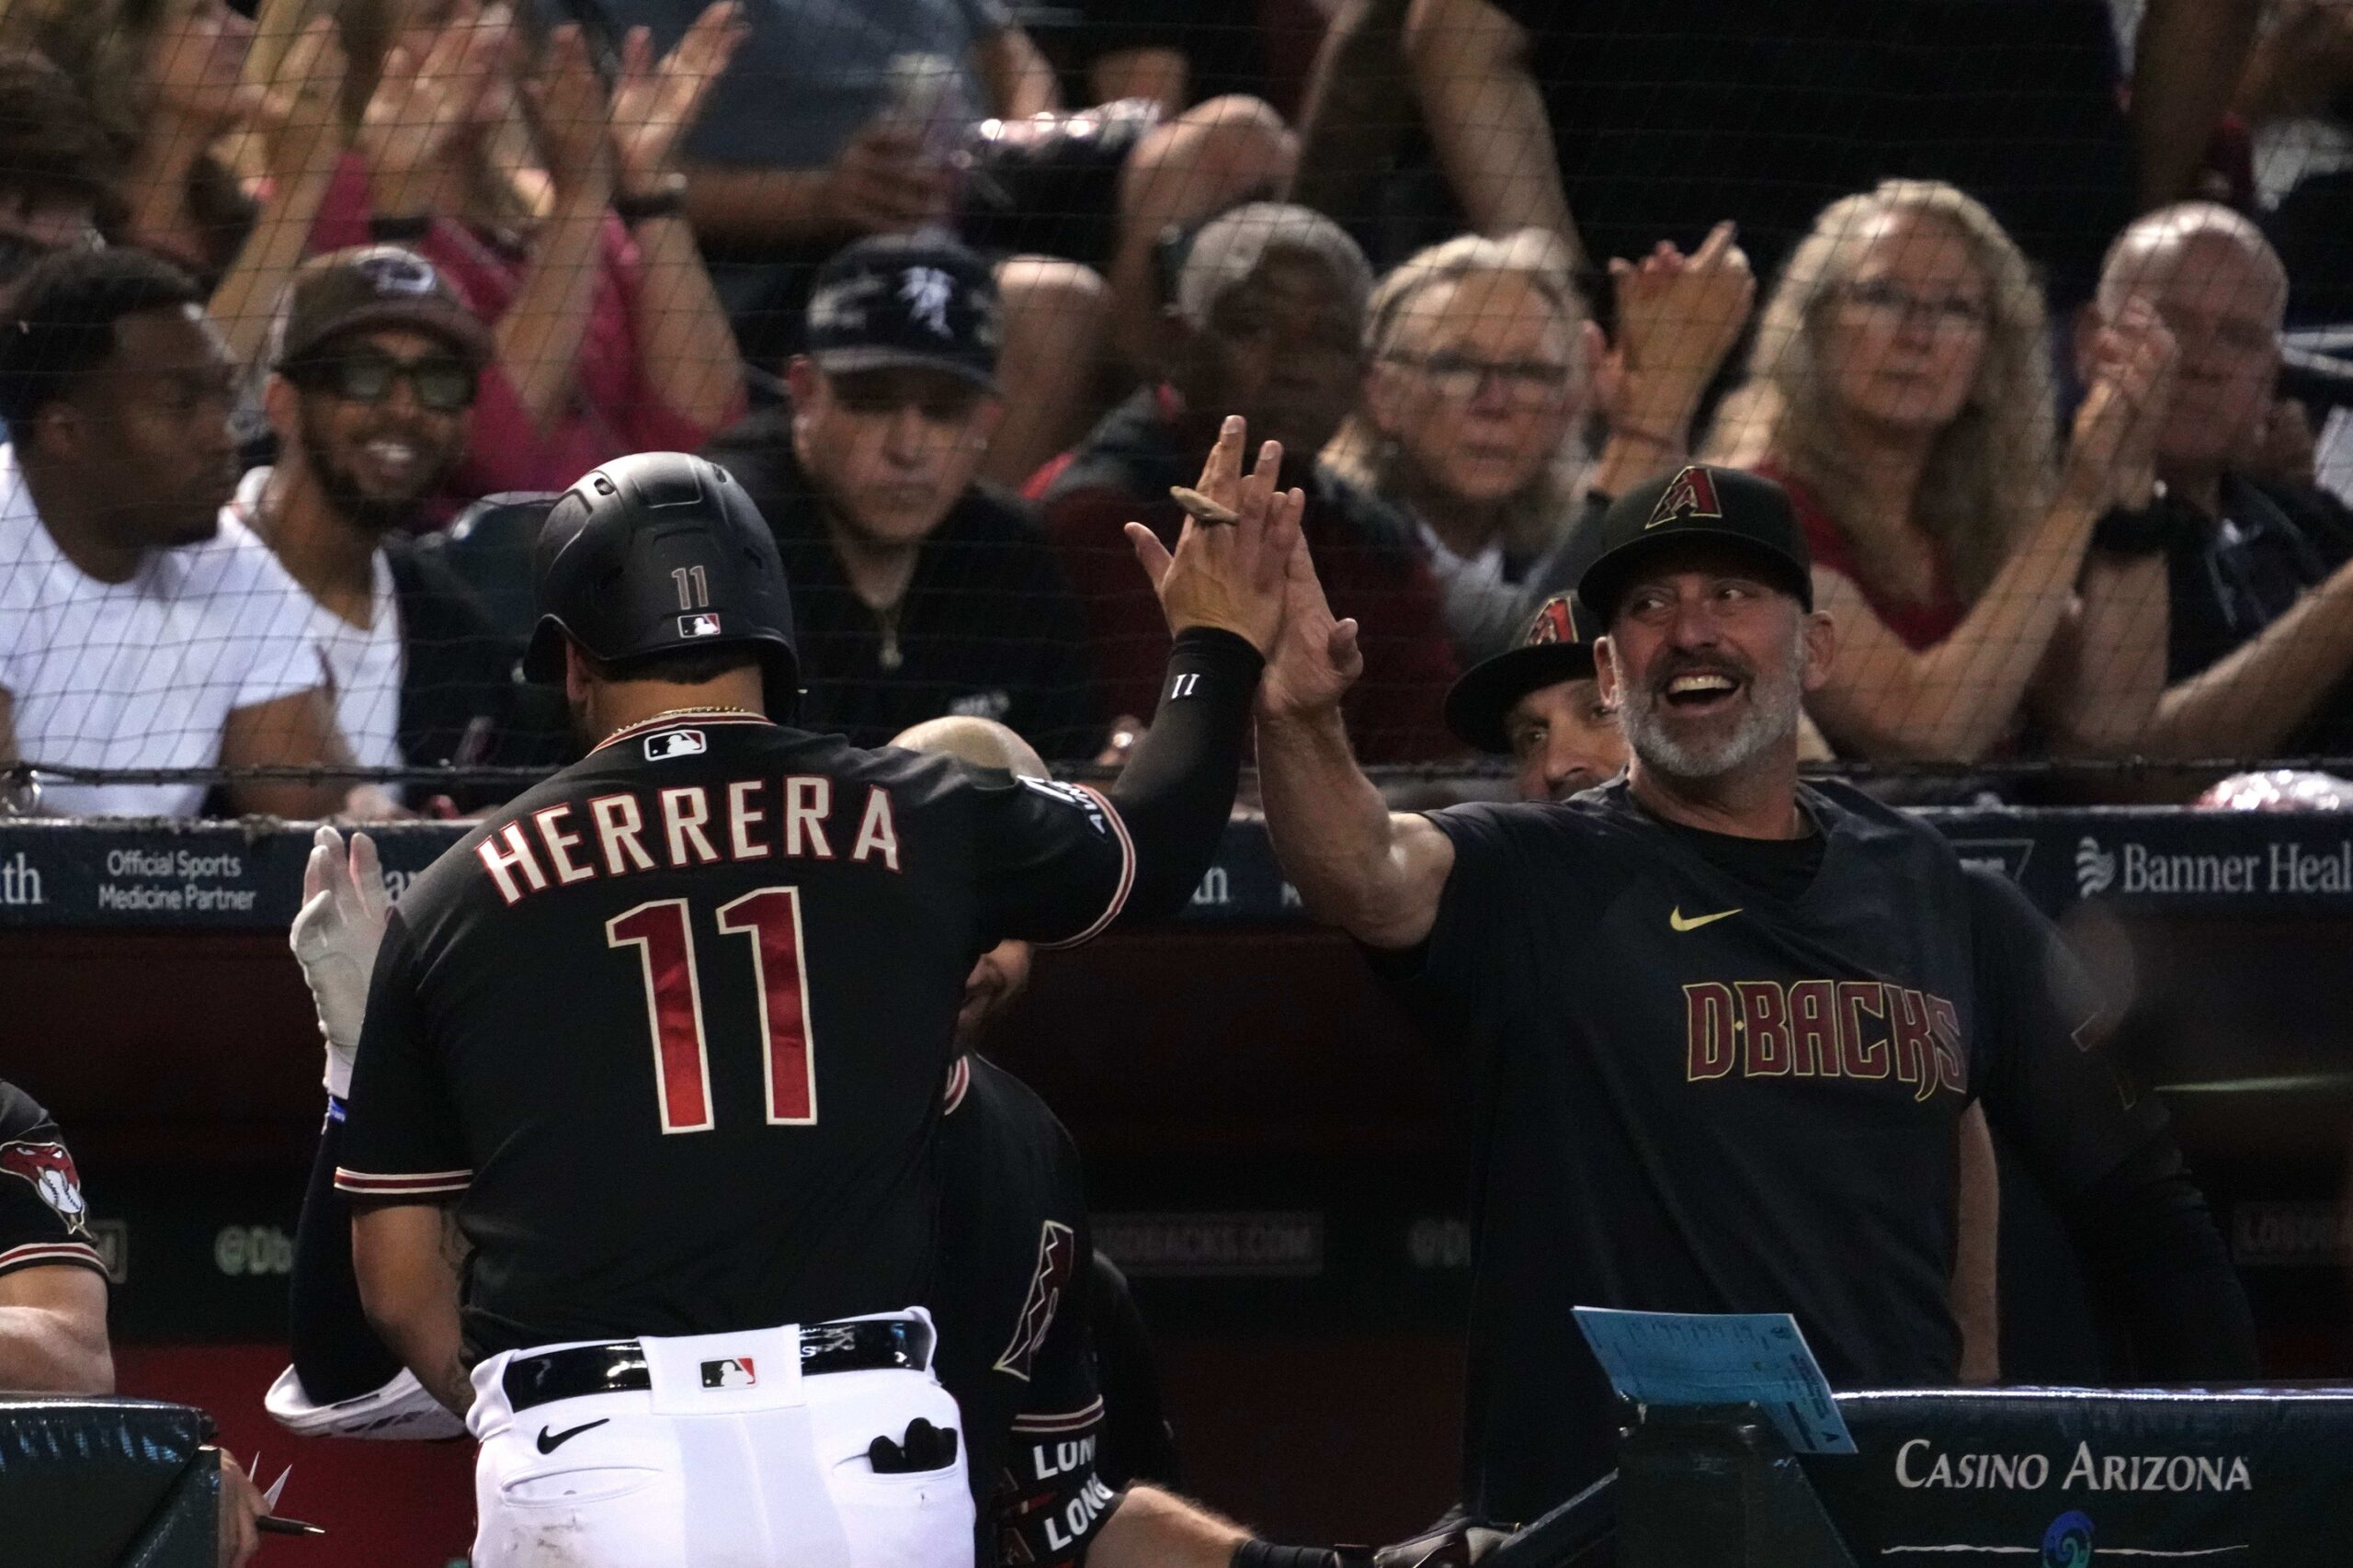 Diamondbacks catcher Jose Herrera slaps hands with manager Torey Lovullo after scoring a run against the San Francisco Giants at Chase Field. (Joe Camporeale/USA TODAY Sports)